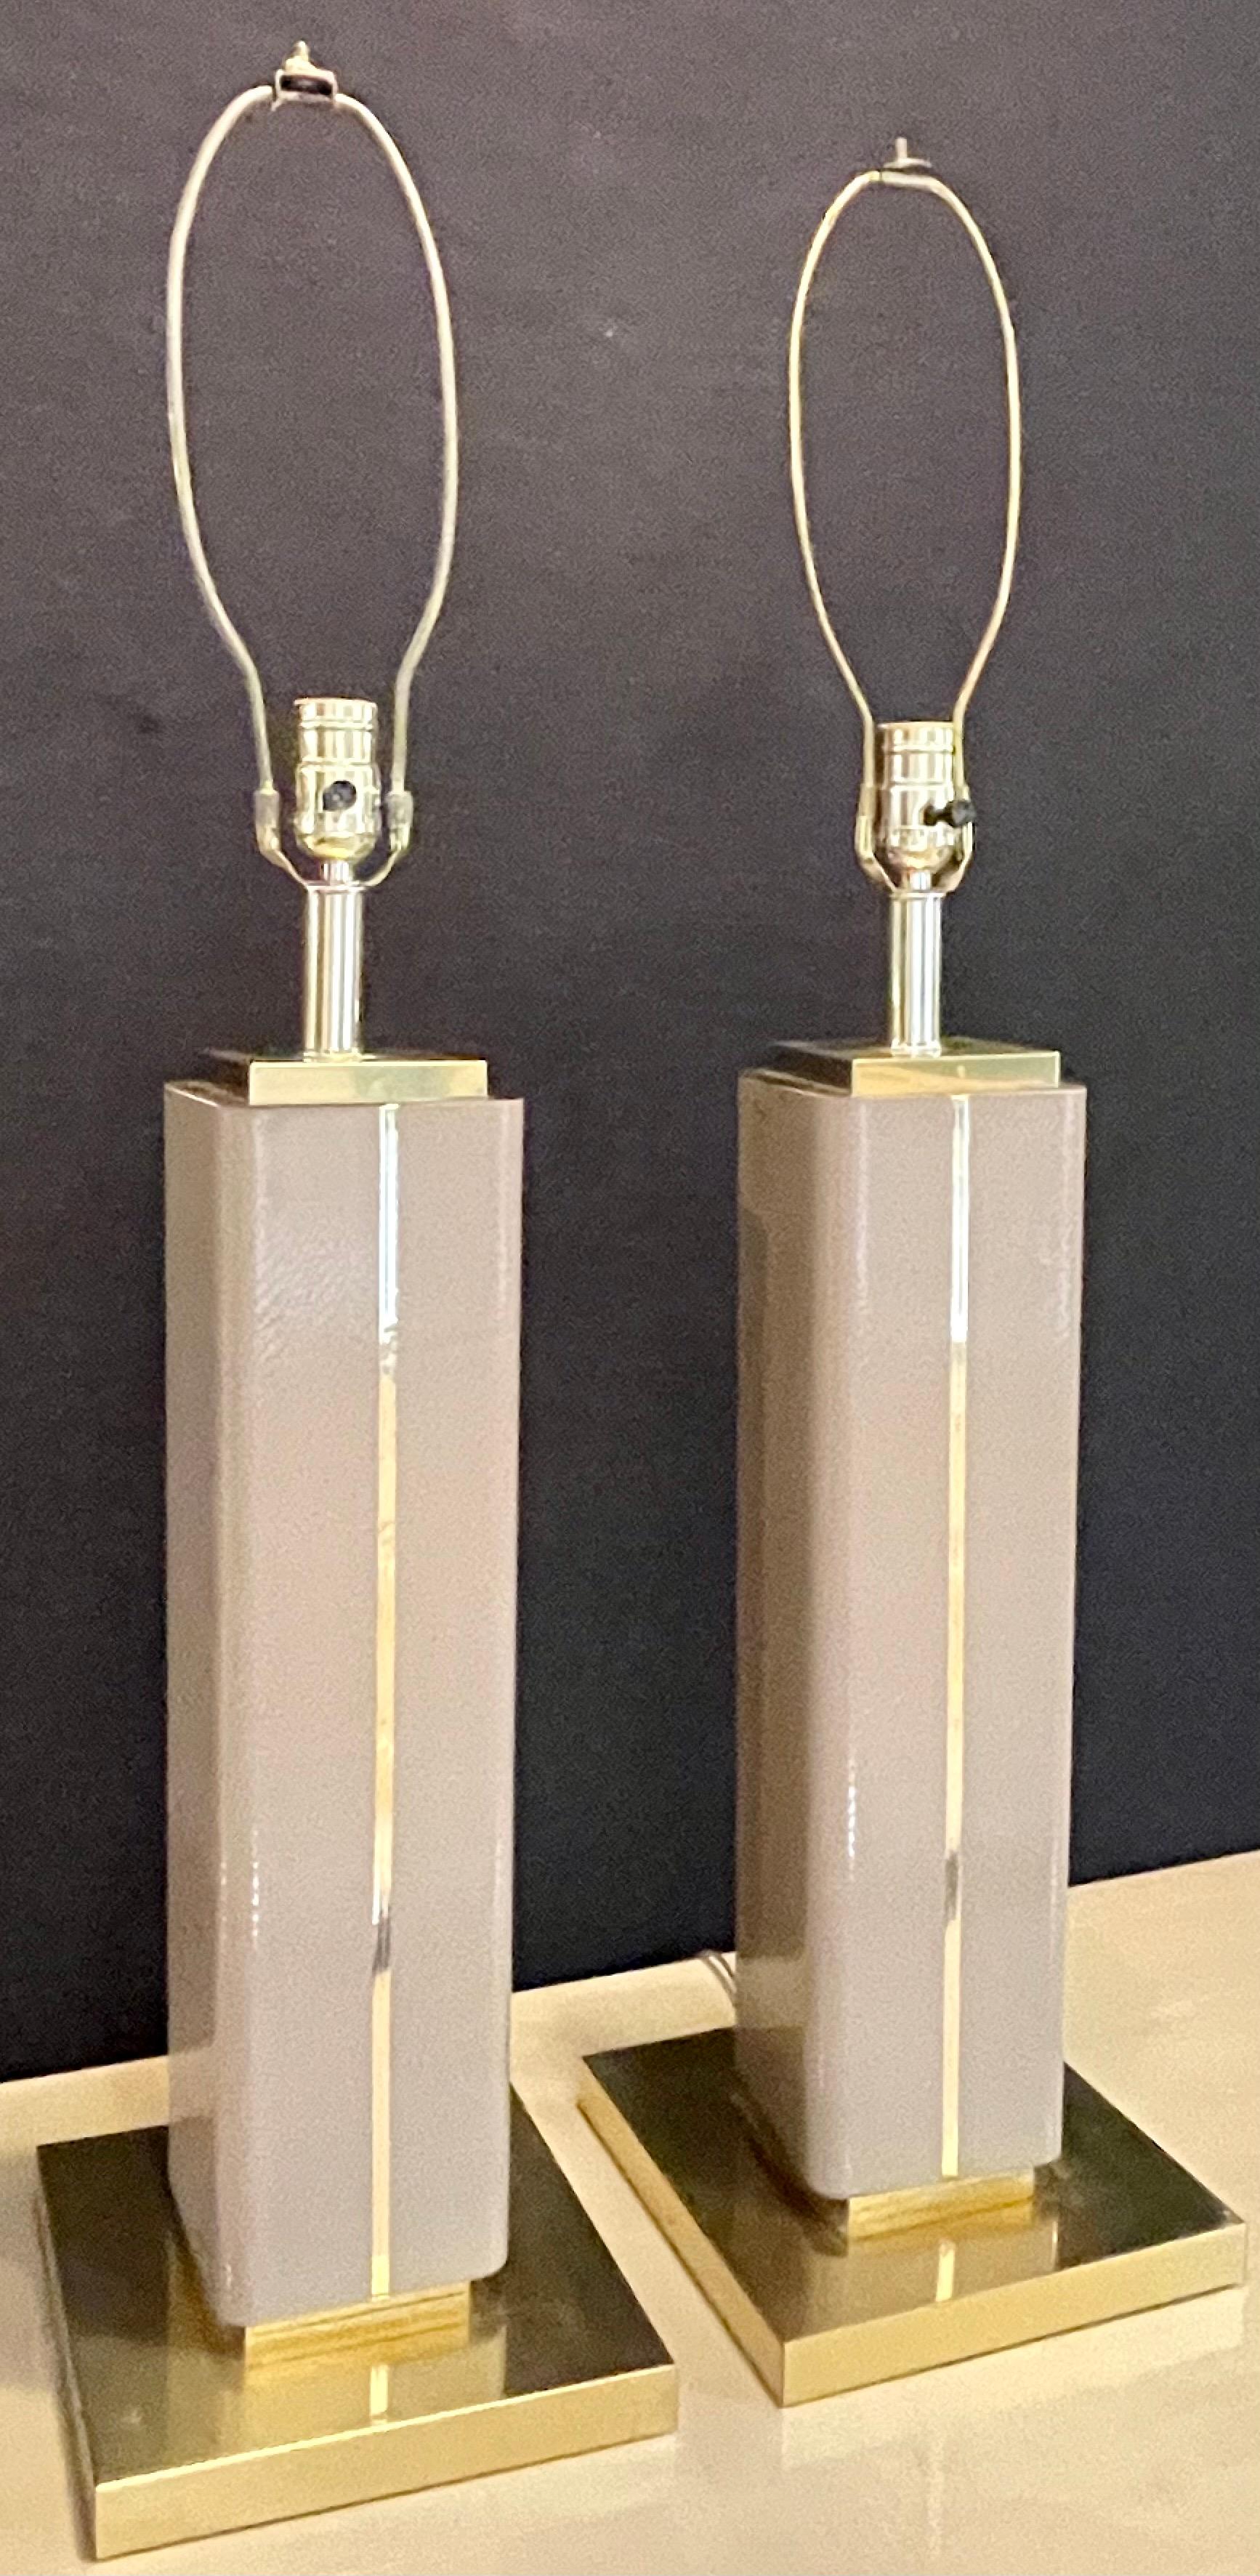 Gilt Pair of Leather Wrapped Modern Table Lamps with Custom Shades, Lorin Marsh